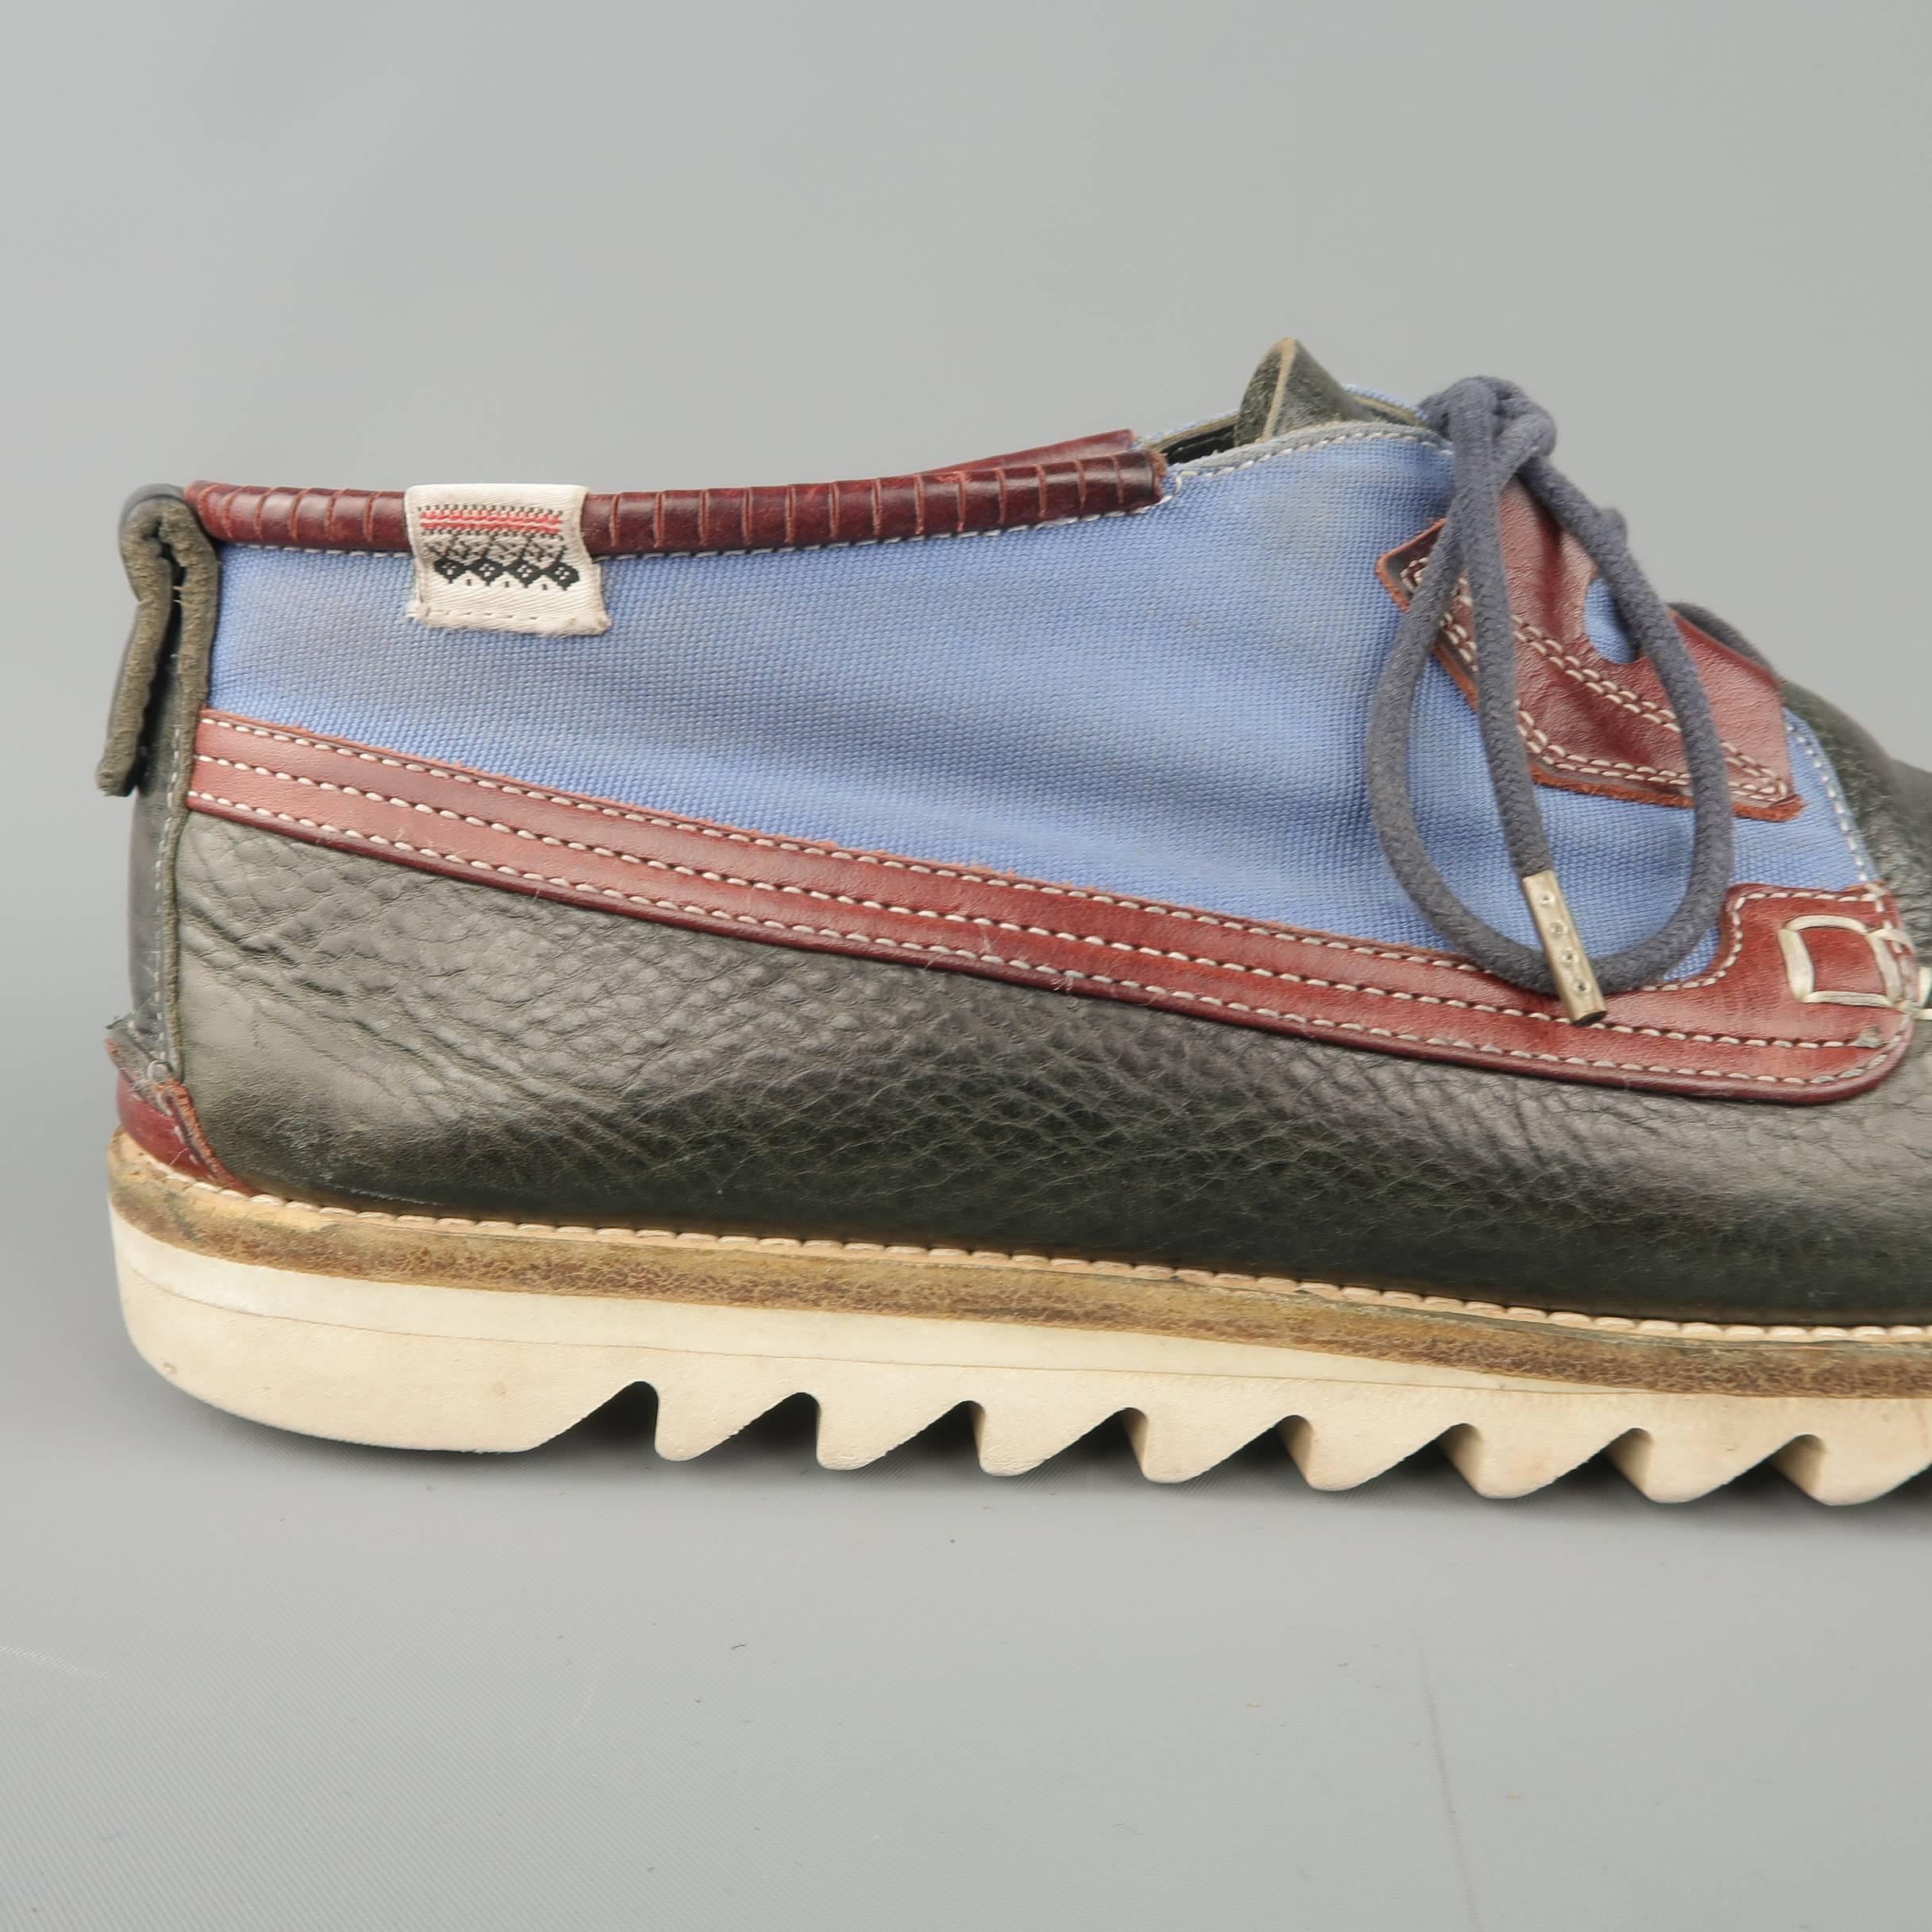 HESCHUNG boat shoe comes in a deep olive tone navy leather with light blue canvas panel, apron toe, tan leather details, and white shark sole. Wear throughout. Made in France.
 
Fair Pre-Owned Condition.
Marked:UK 8.5
 
Outsole: 12 x 4 in.
